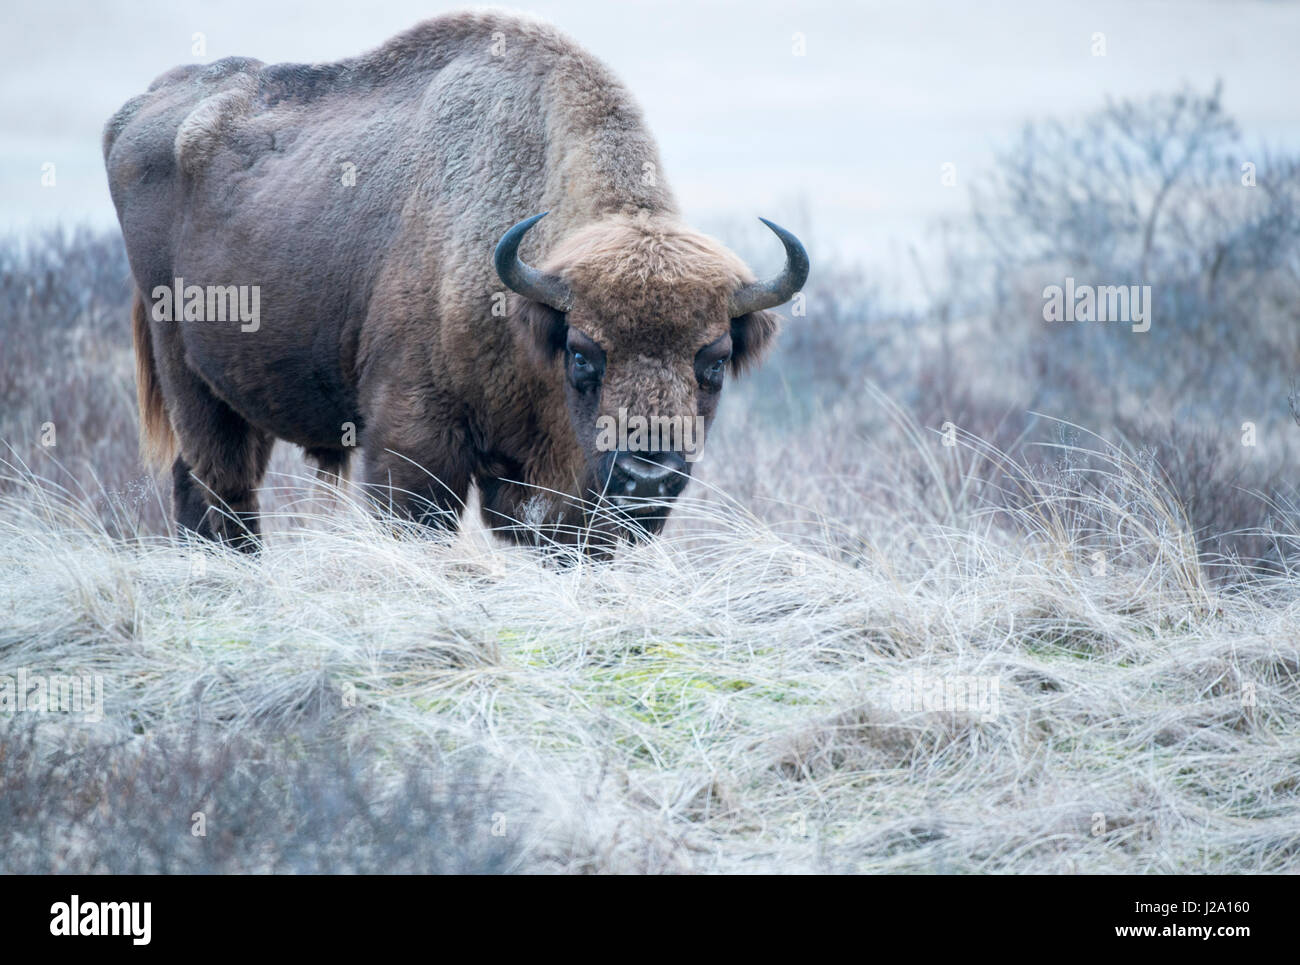 free roaming wild wisent or european bison bull in the dunes as part of a pilotstudy for reintroduction in the Netherlands in the Zuid-Kennermerland National Park Stock Photo